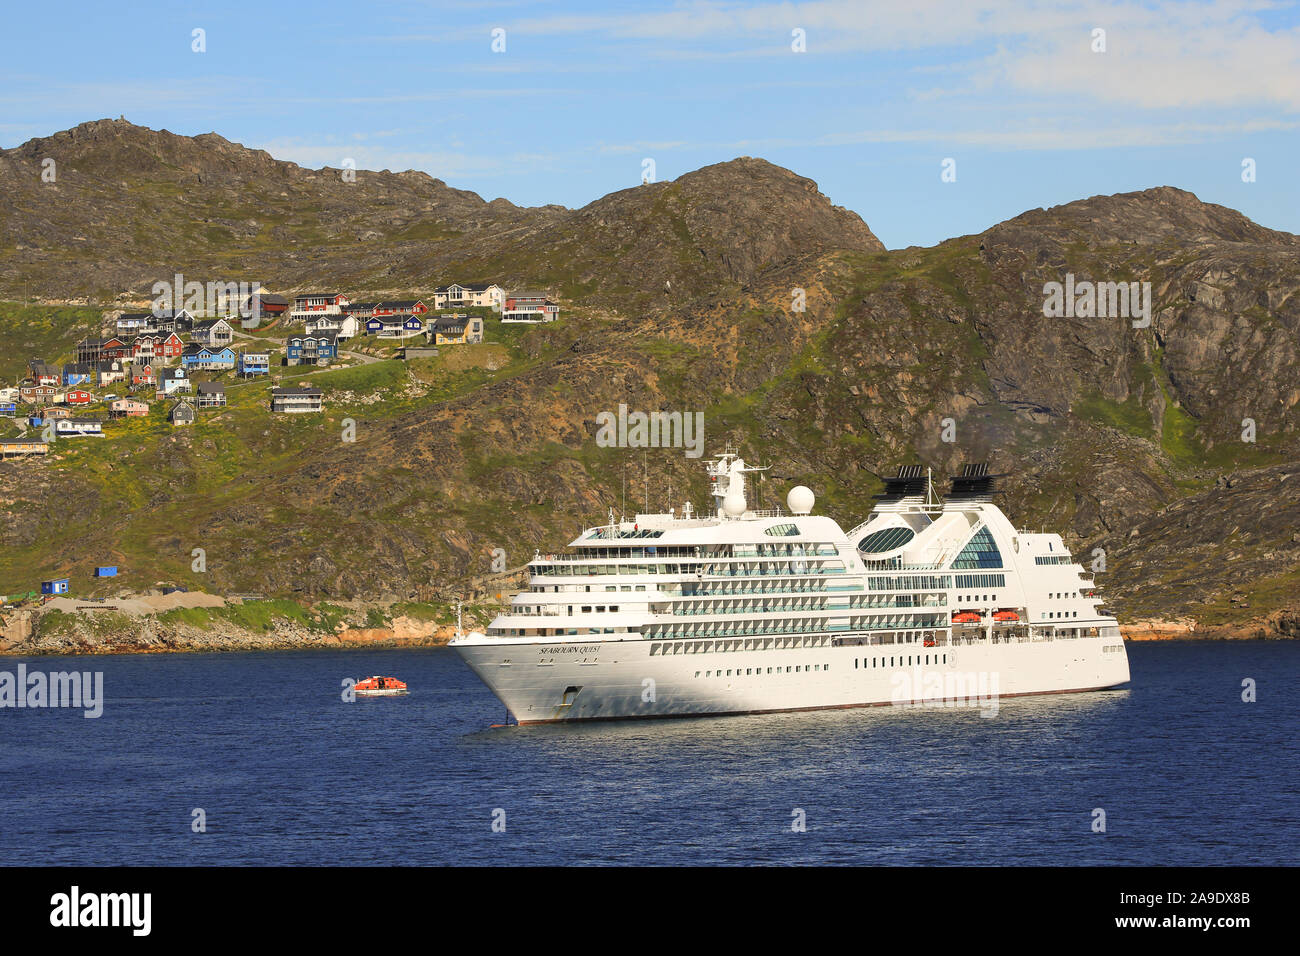 The cruise ship Seabourn Quest anchored off the town of Qaqortoq on the west coast of Greenland. Tendering to shore is underway. Stock Photo